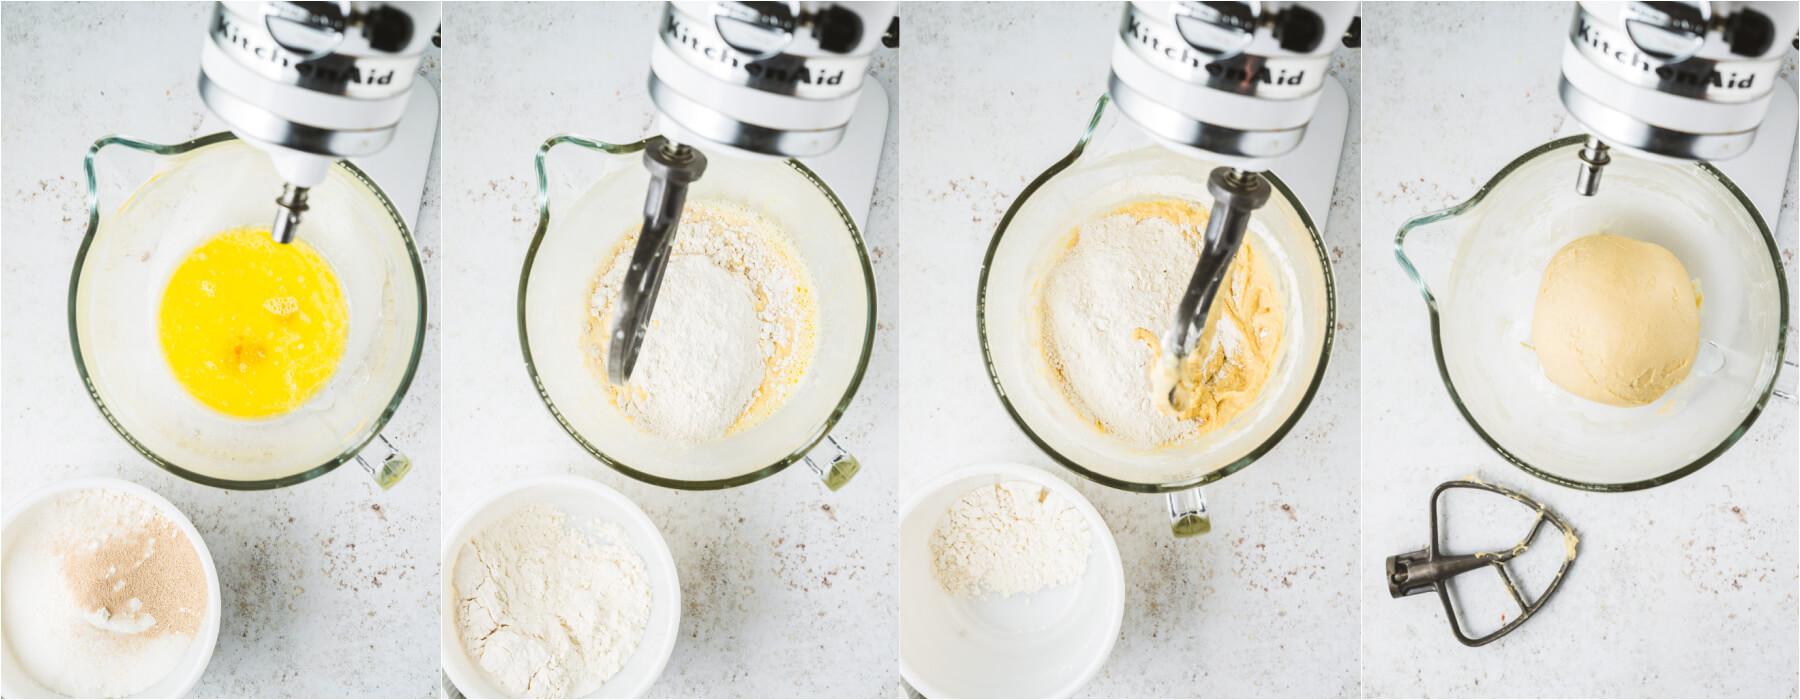 A series of images showing how to mix up dough in a stand mixer.